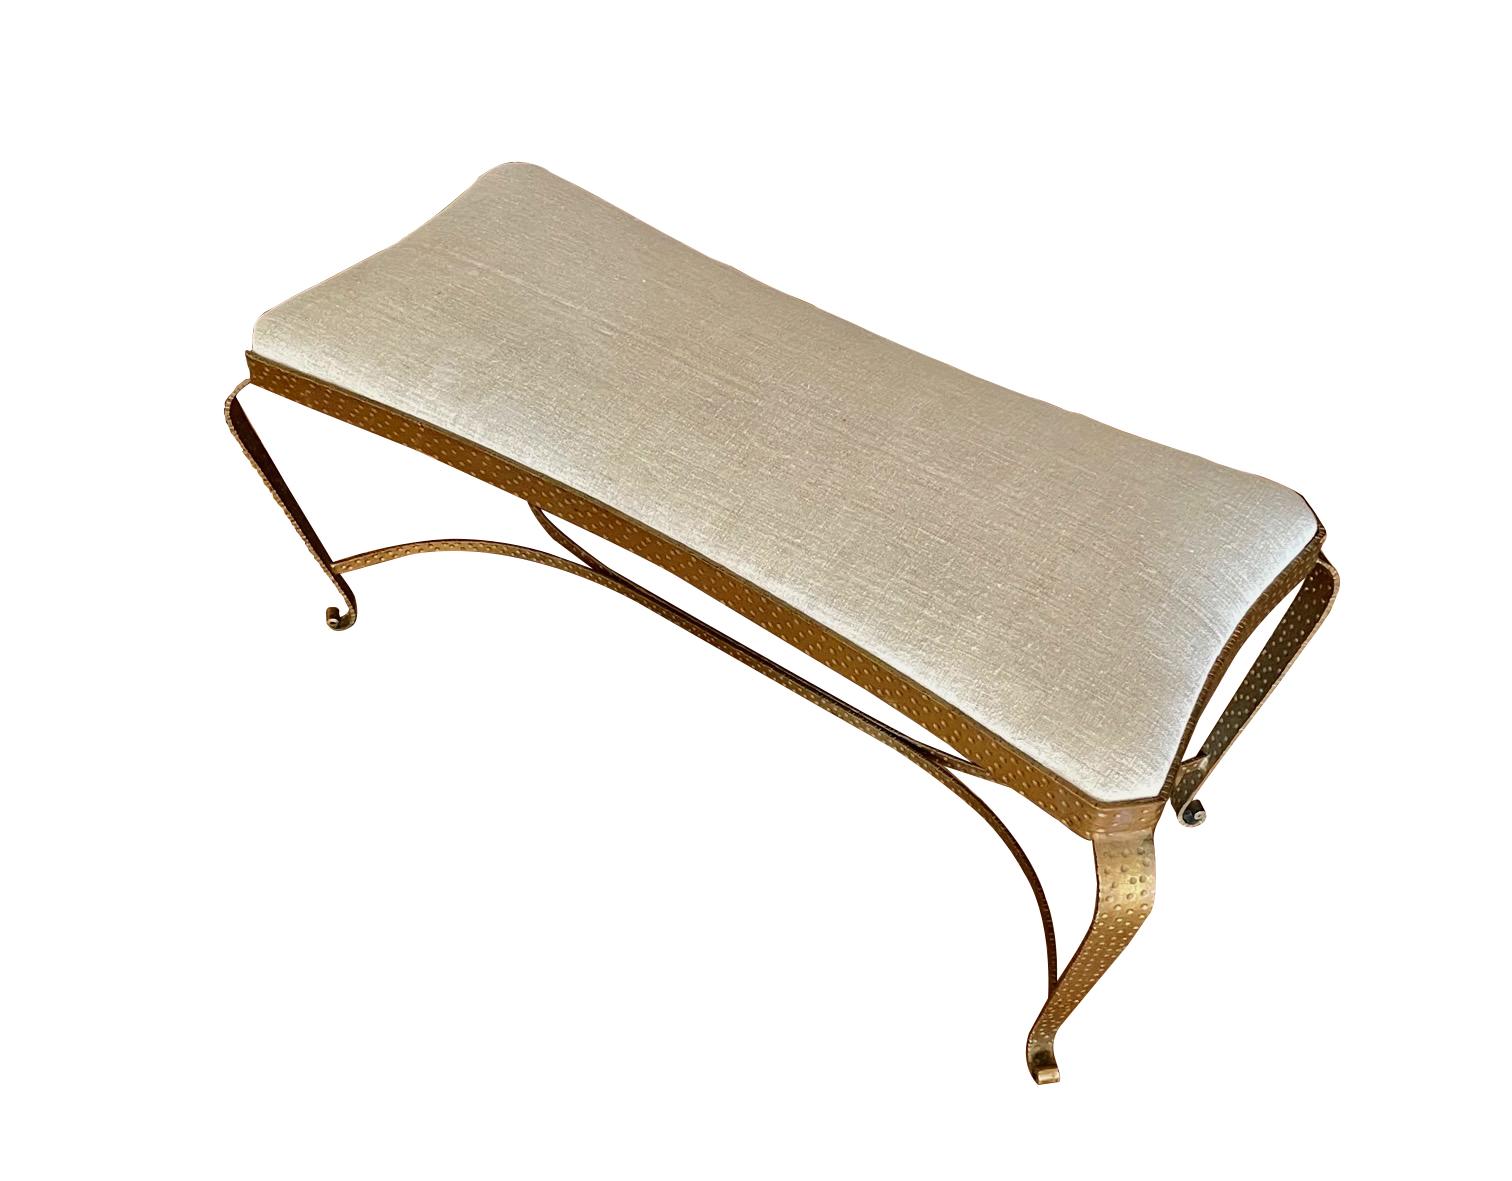 Midcentury Italian Luigi Colli bench.
Signature gilded gold iron with impressed dots.
Newly reupholstered in vintage hand spun Belgian linen.